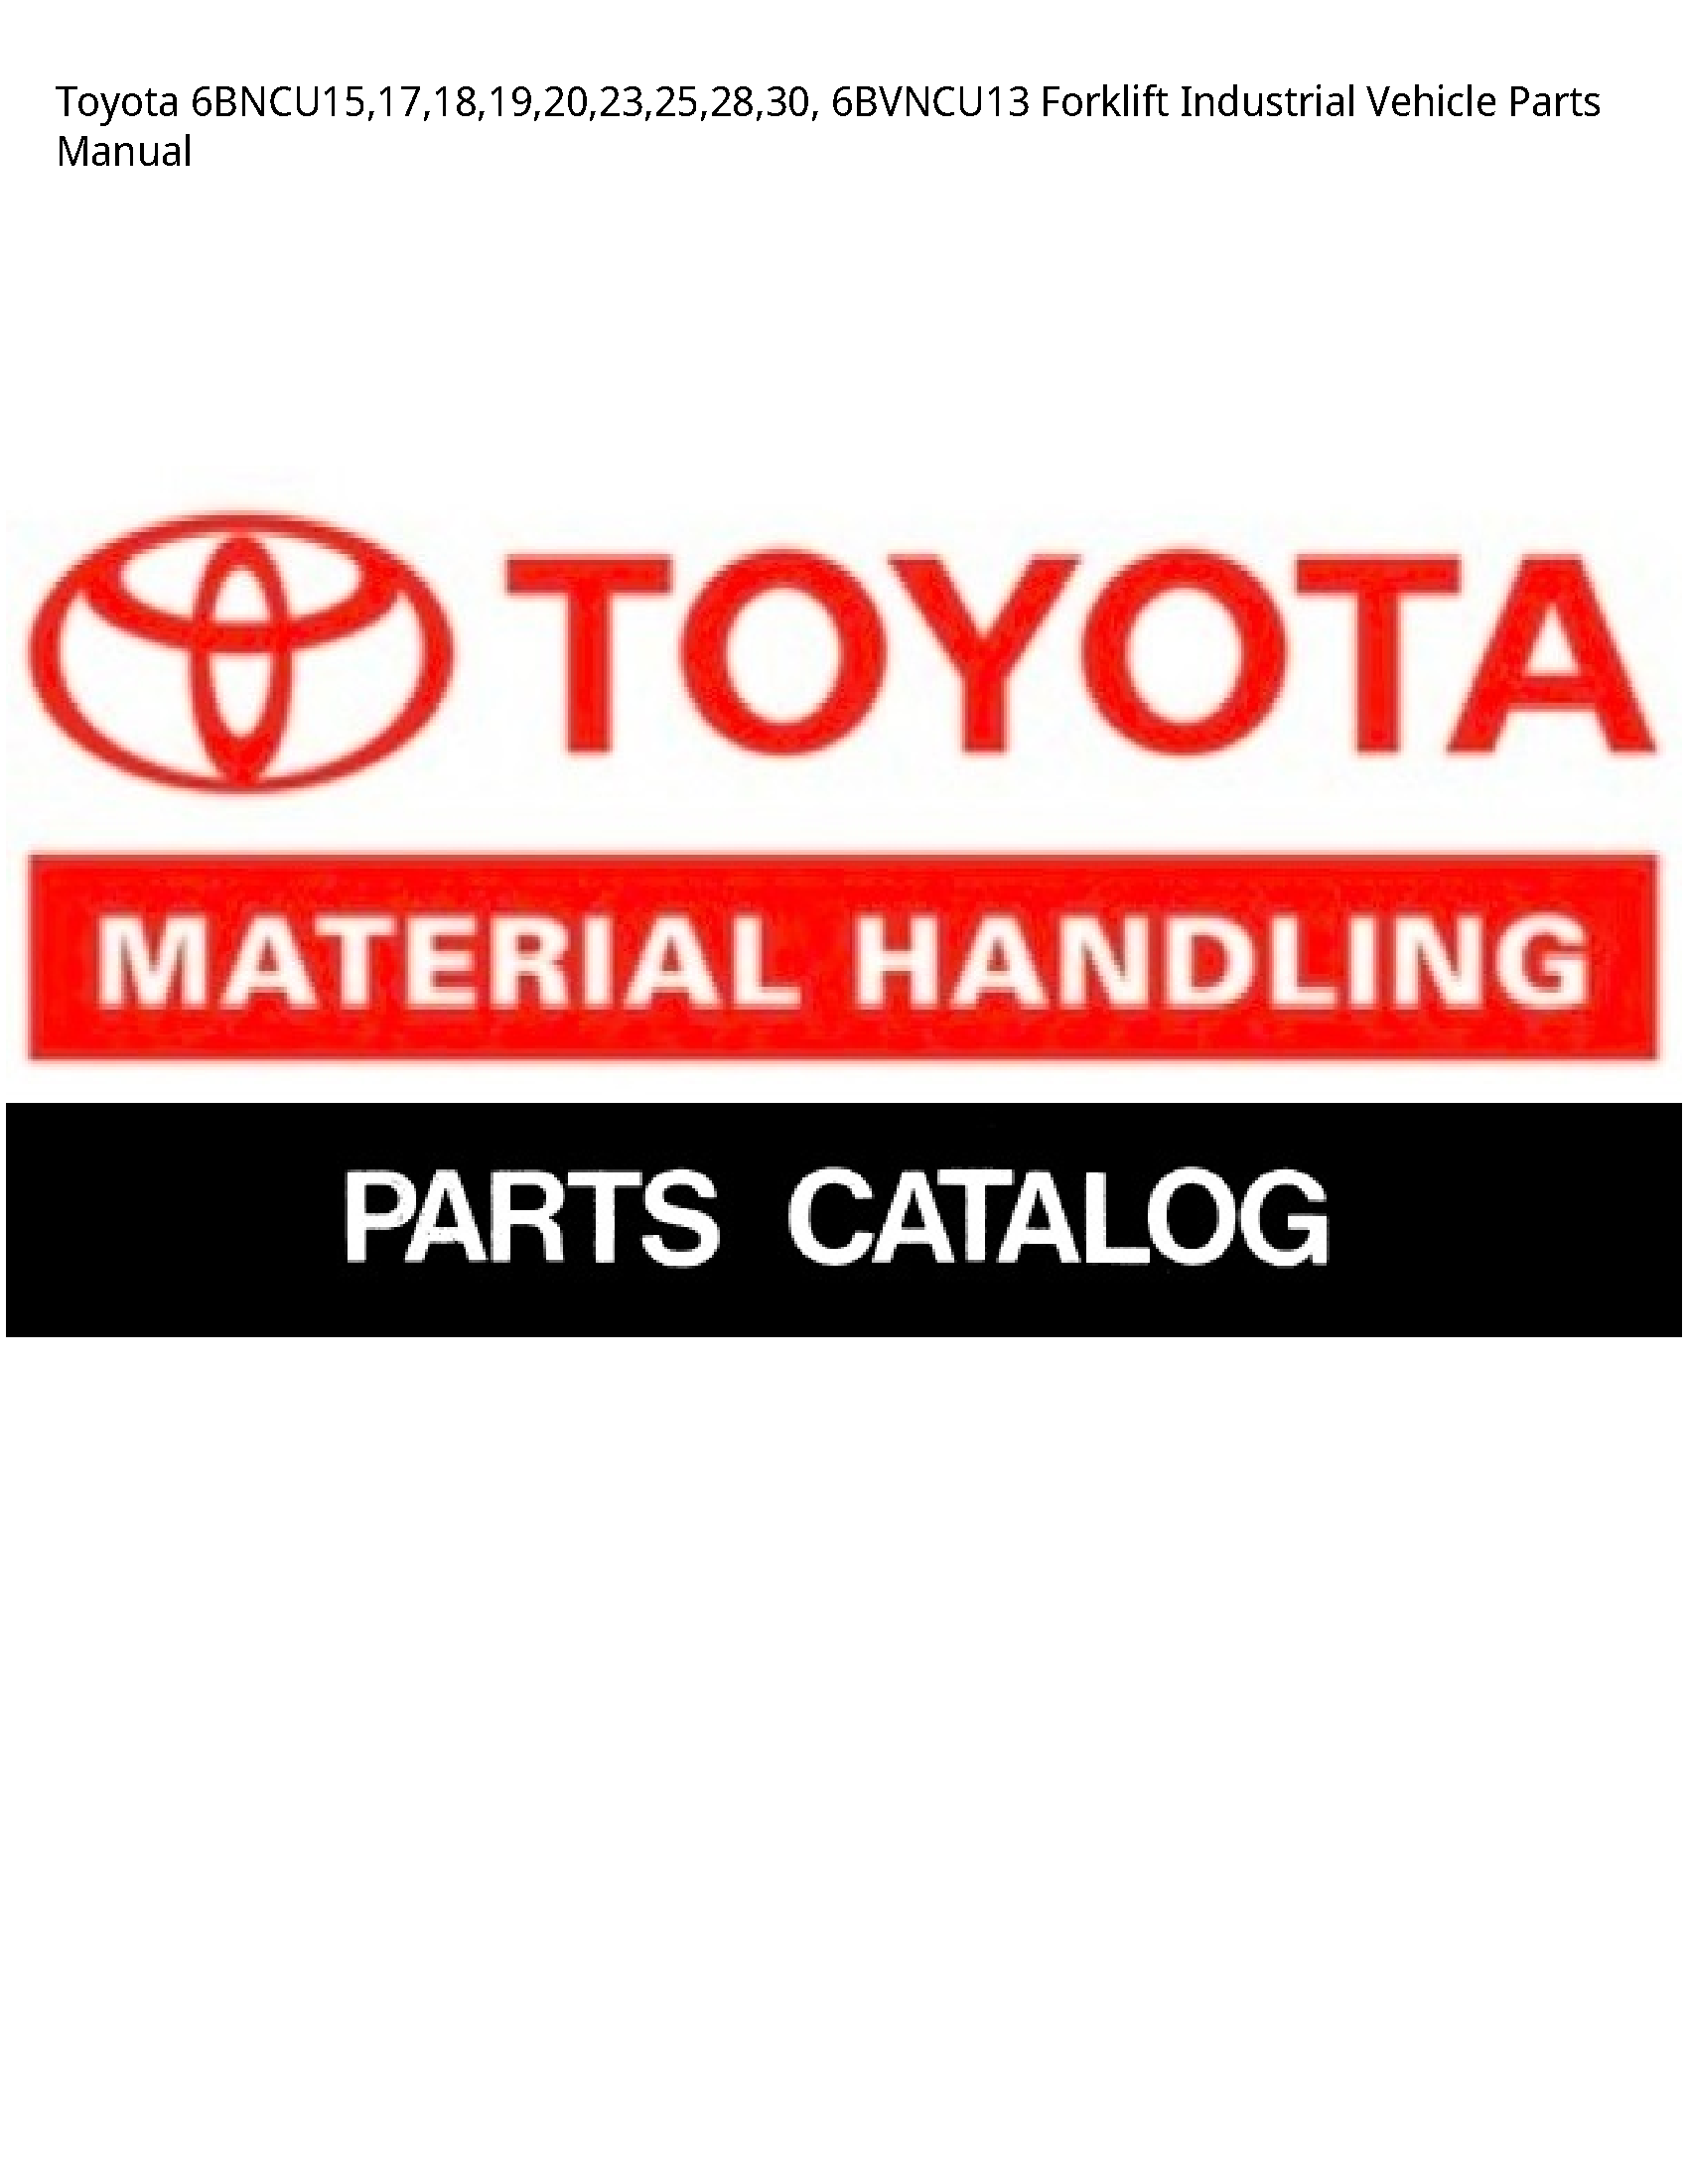 Toyota 6BNCU15 Forklift Industrial Vehicle Parts manual